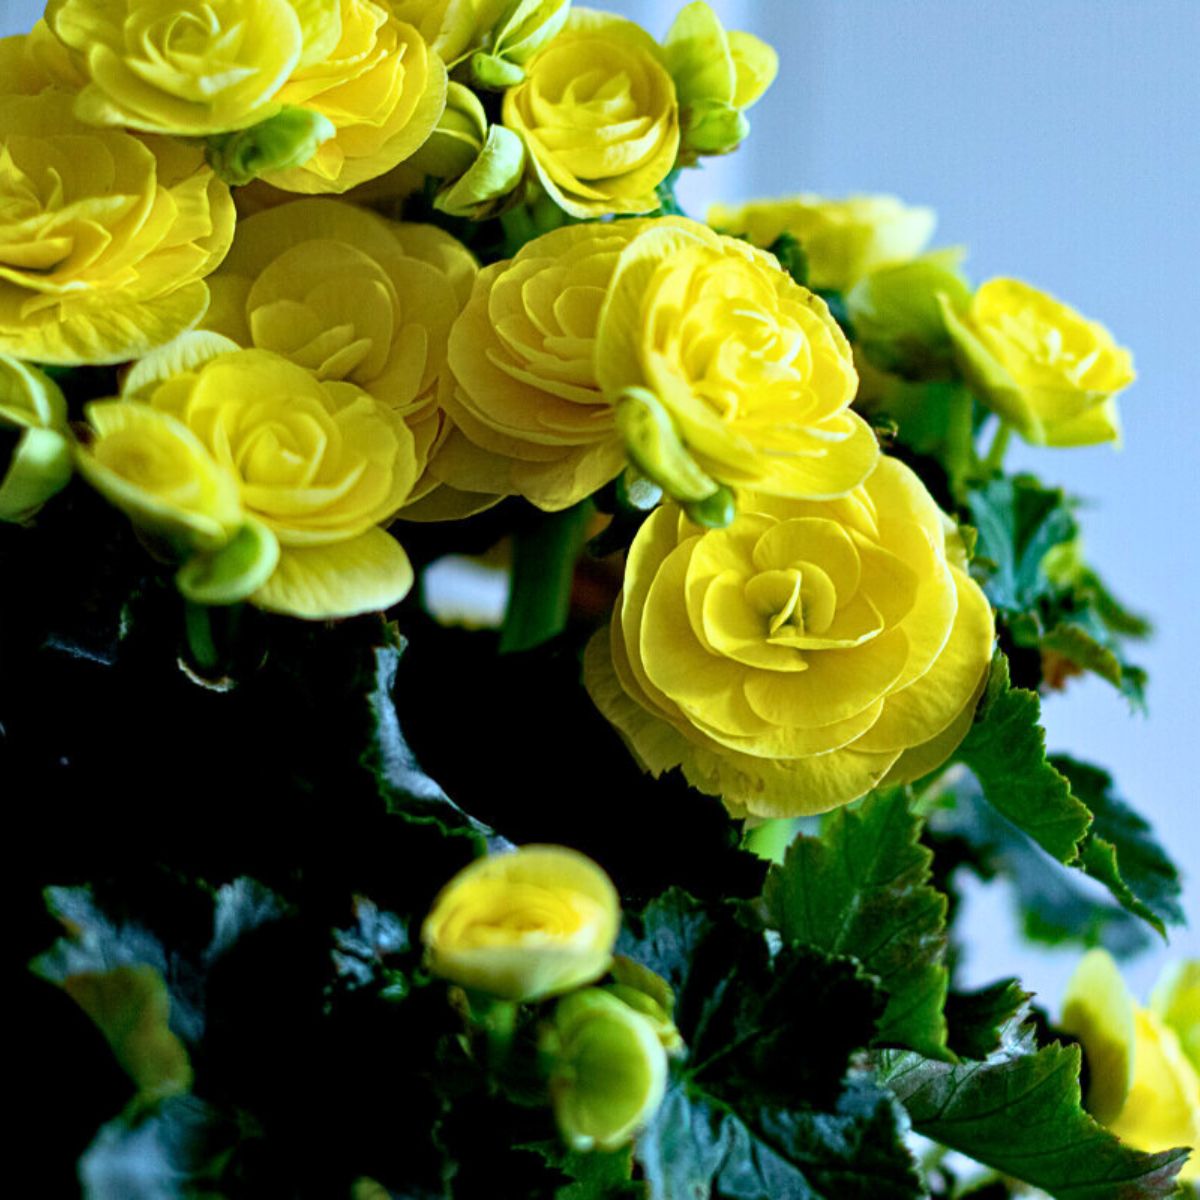 Begonia Hailey Yellow Is Koppe’s Bright Yellow Floral Accessory